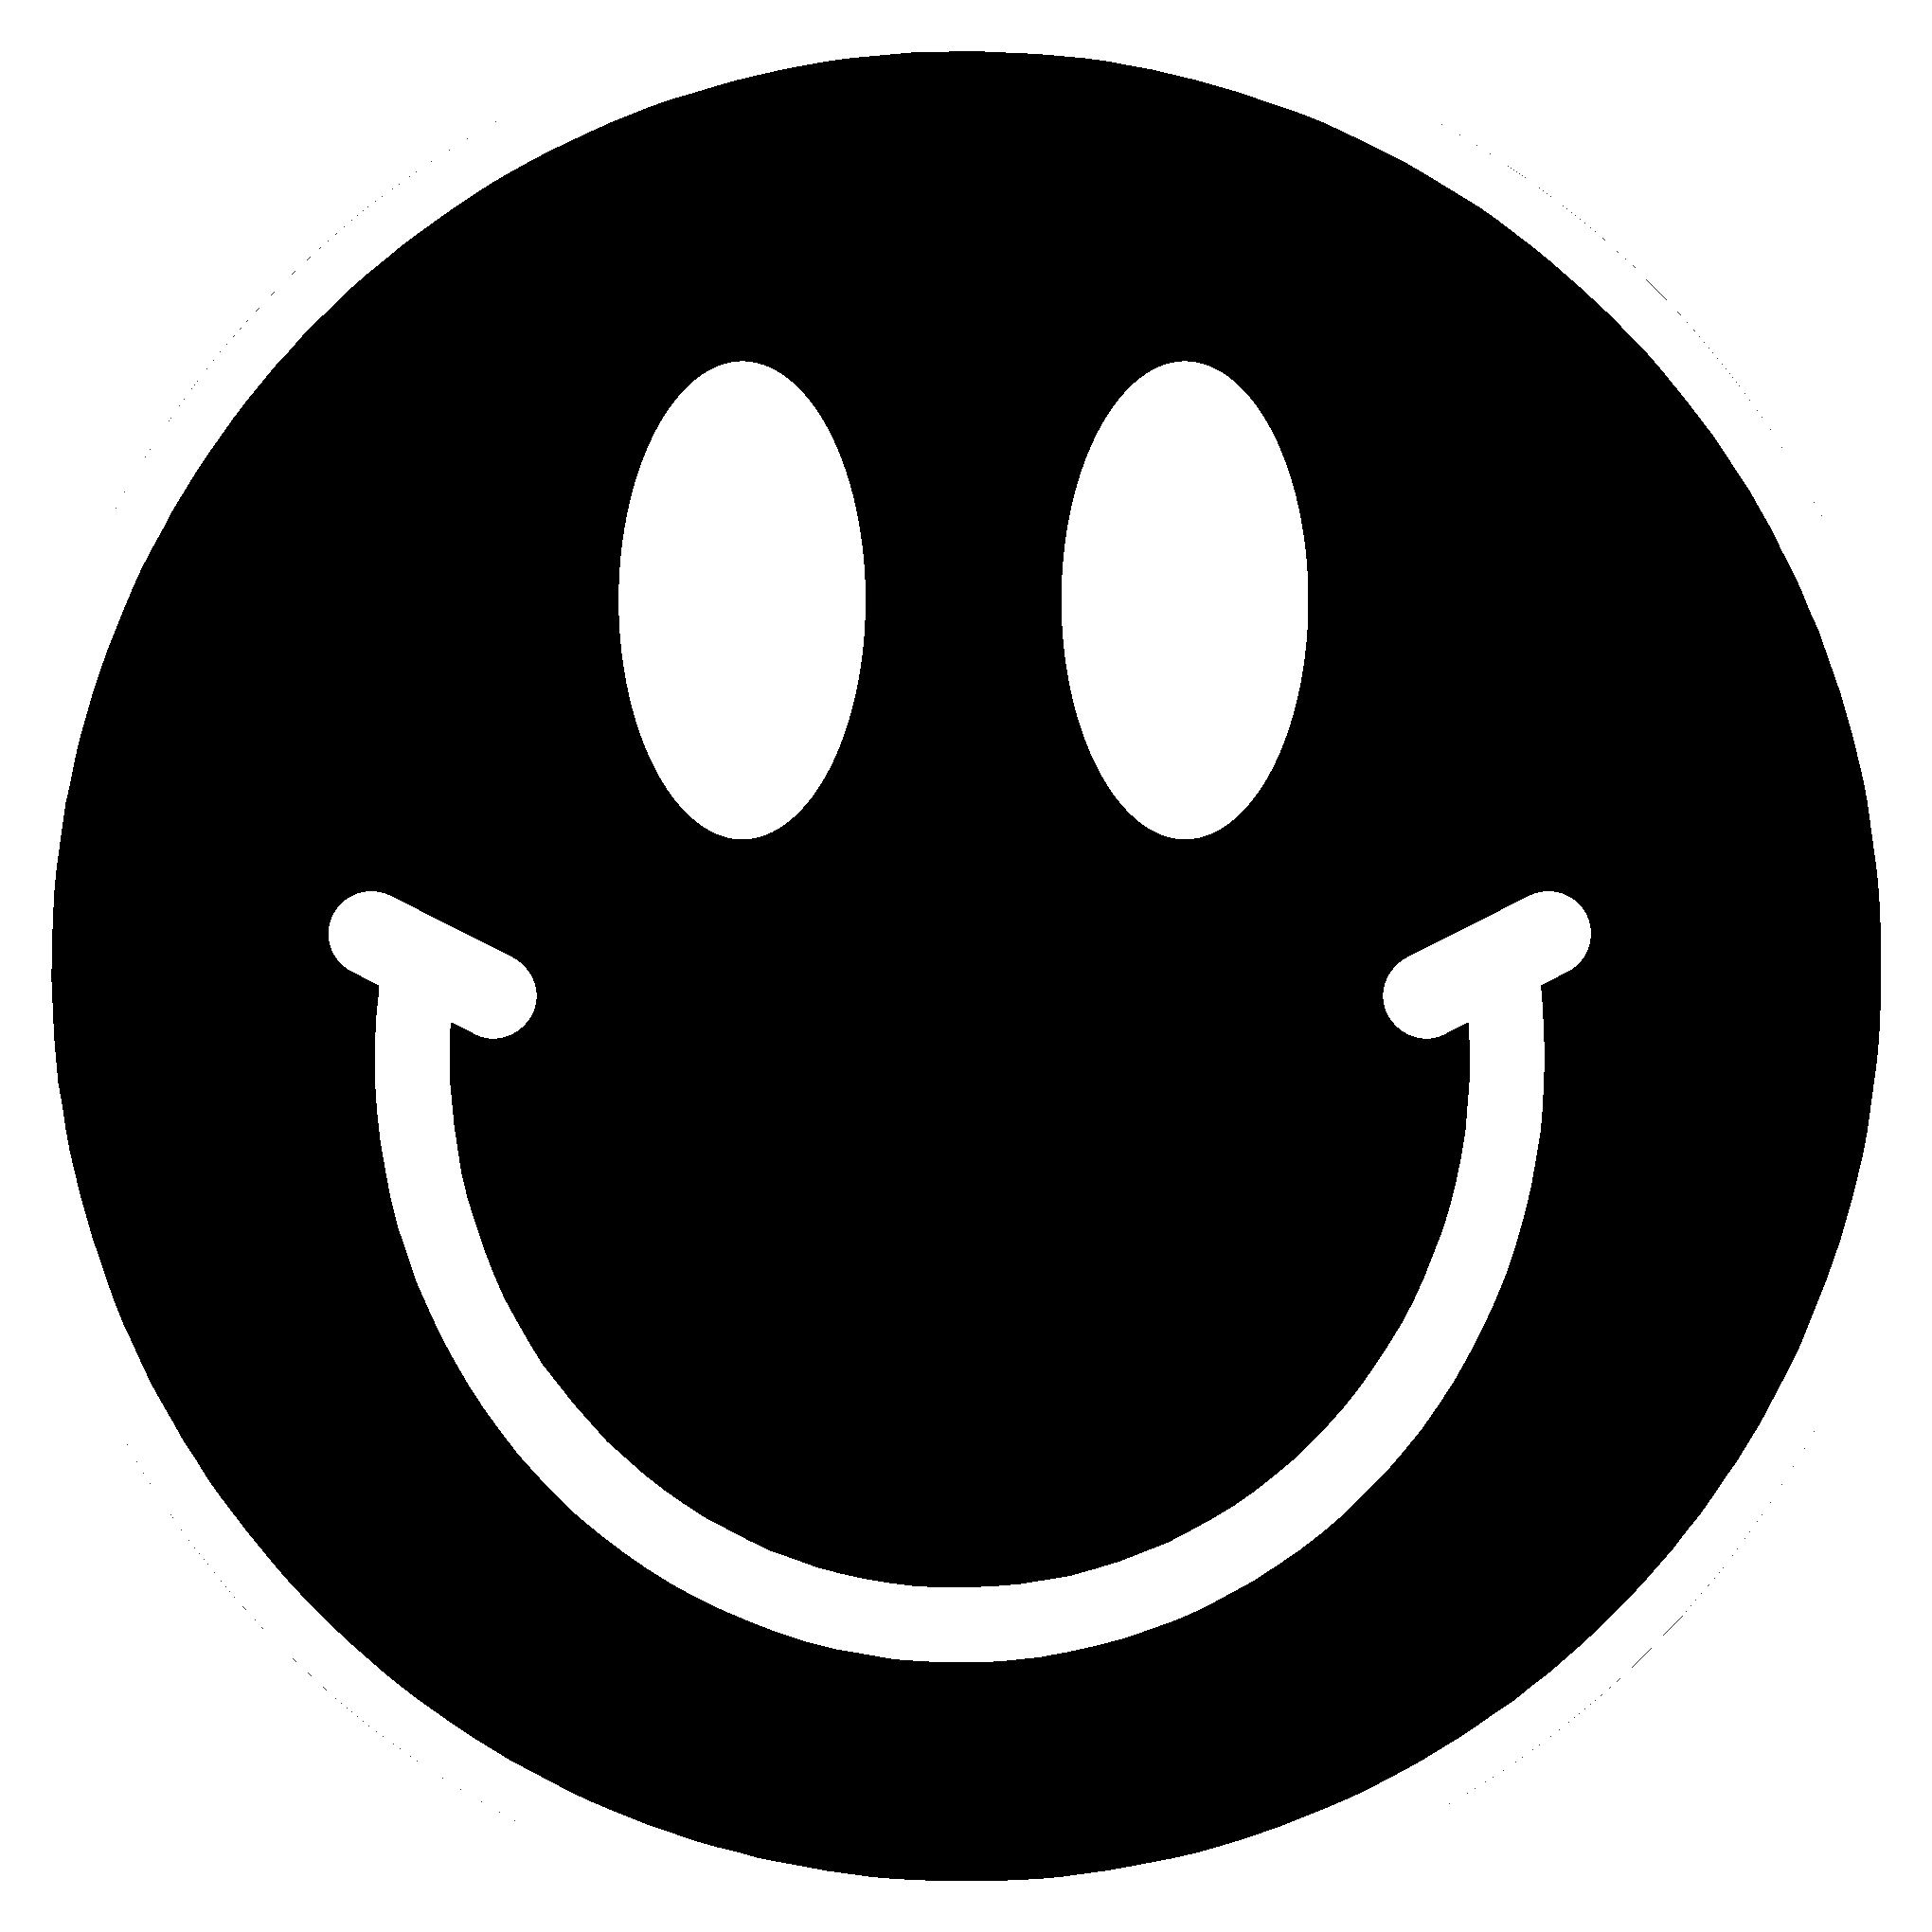 Smiley Face Black Background - ClipArt Best